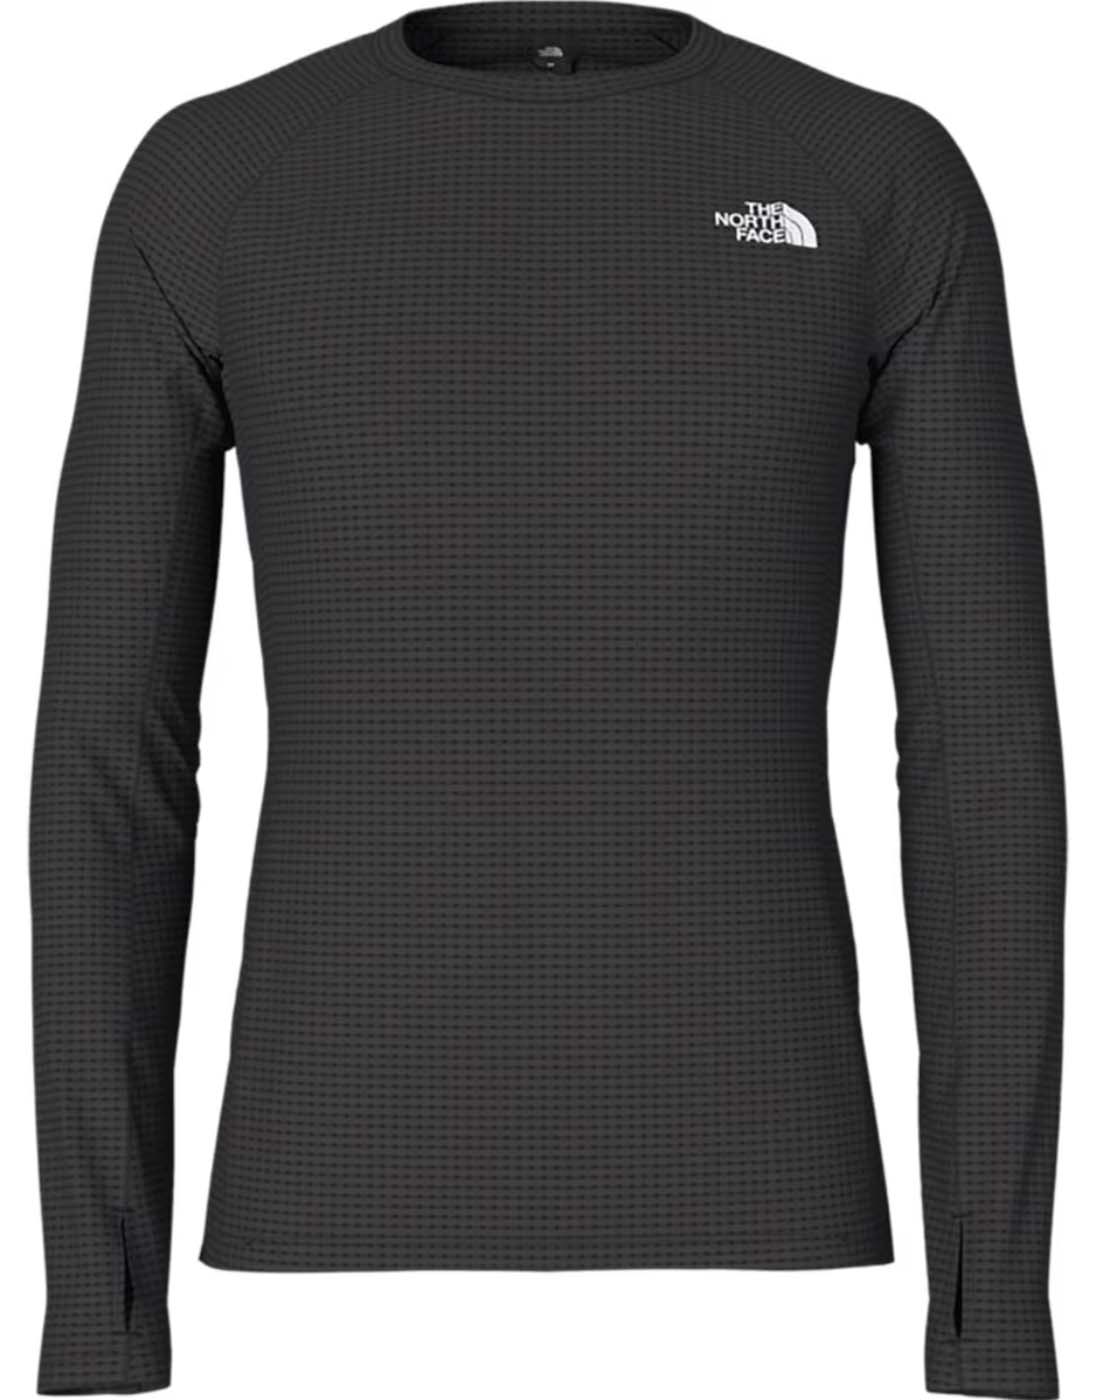 The North Face Summit Series Pro 120 Crew baselayer